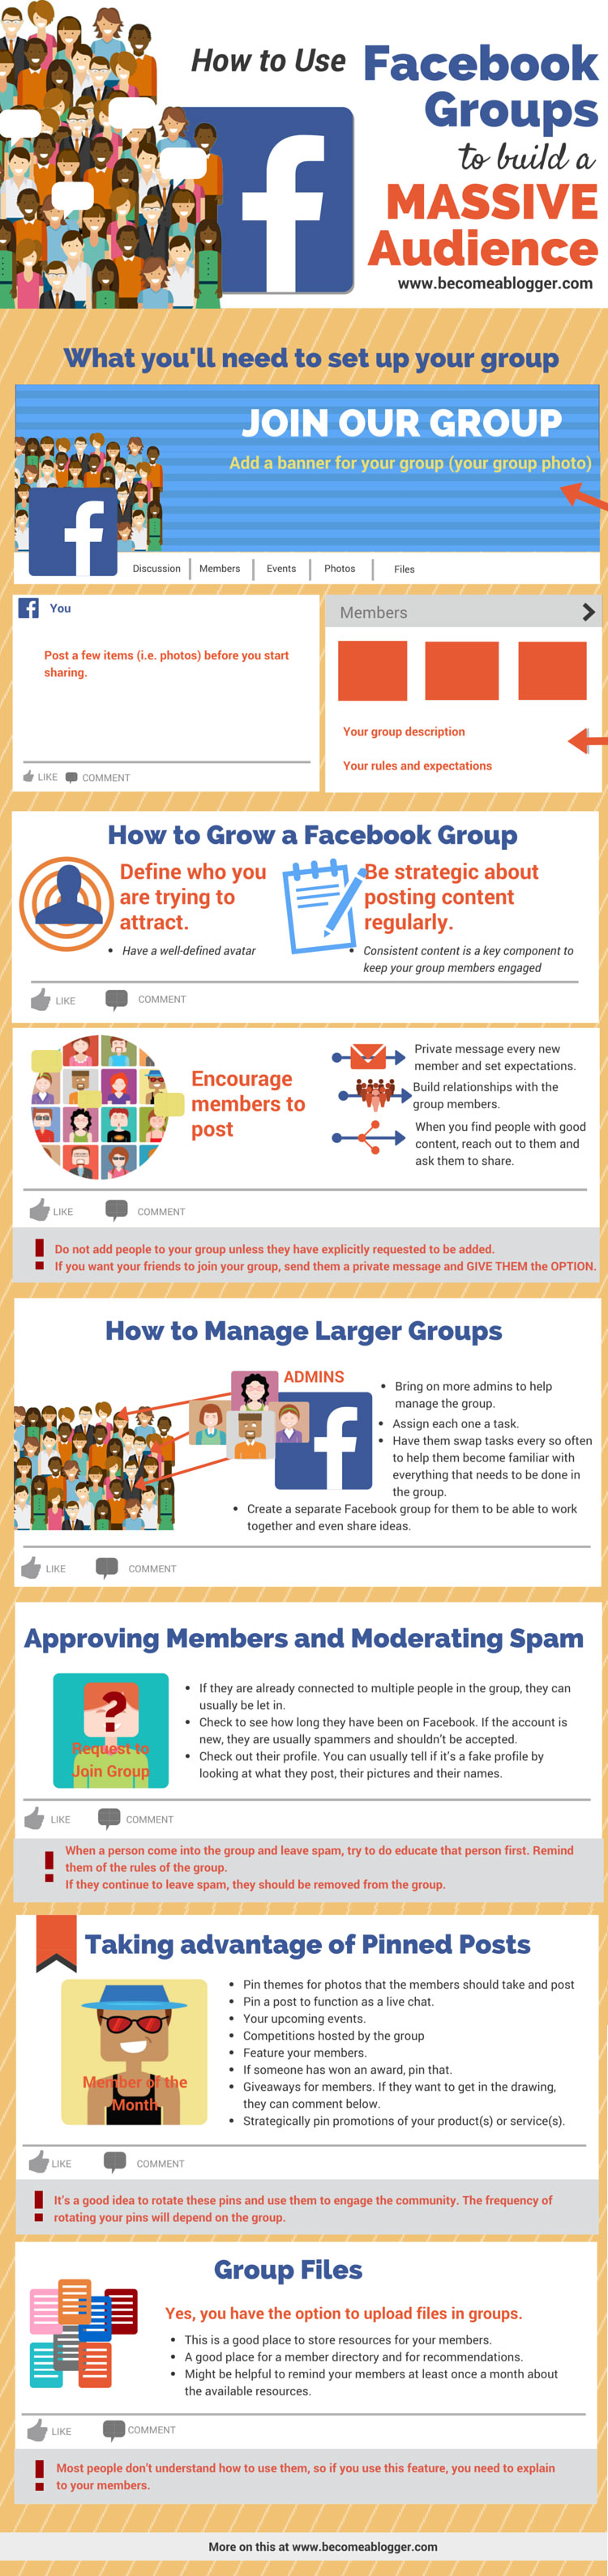 Facebook Groups Infographic